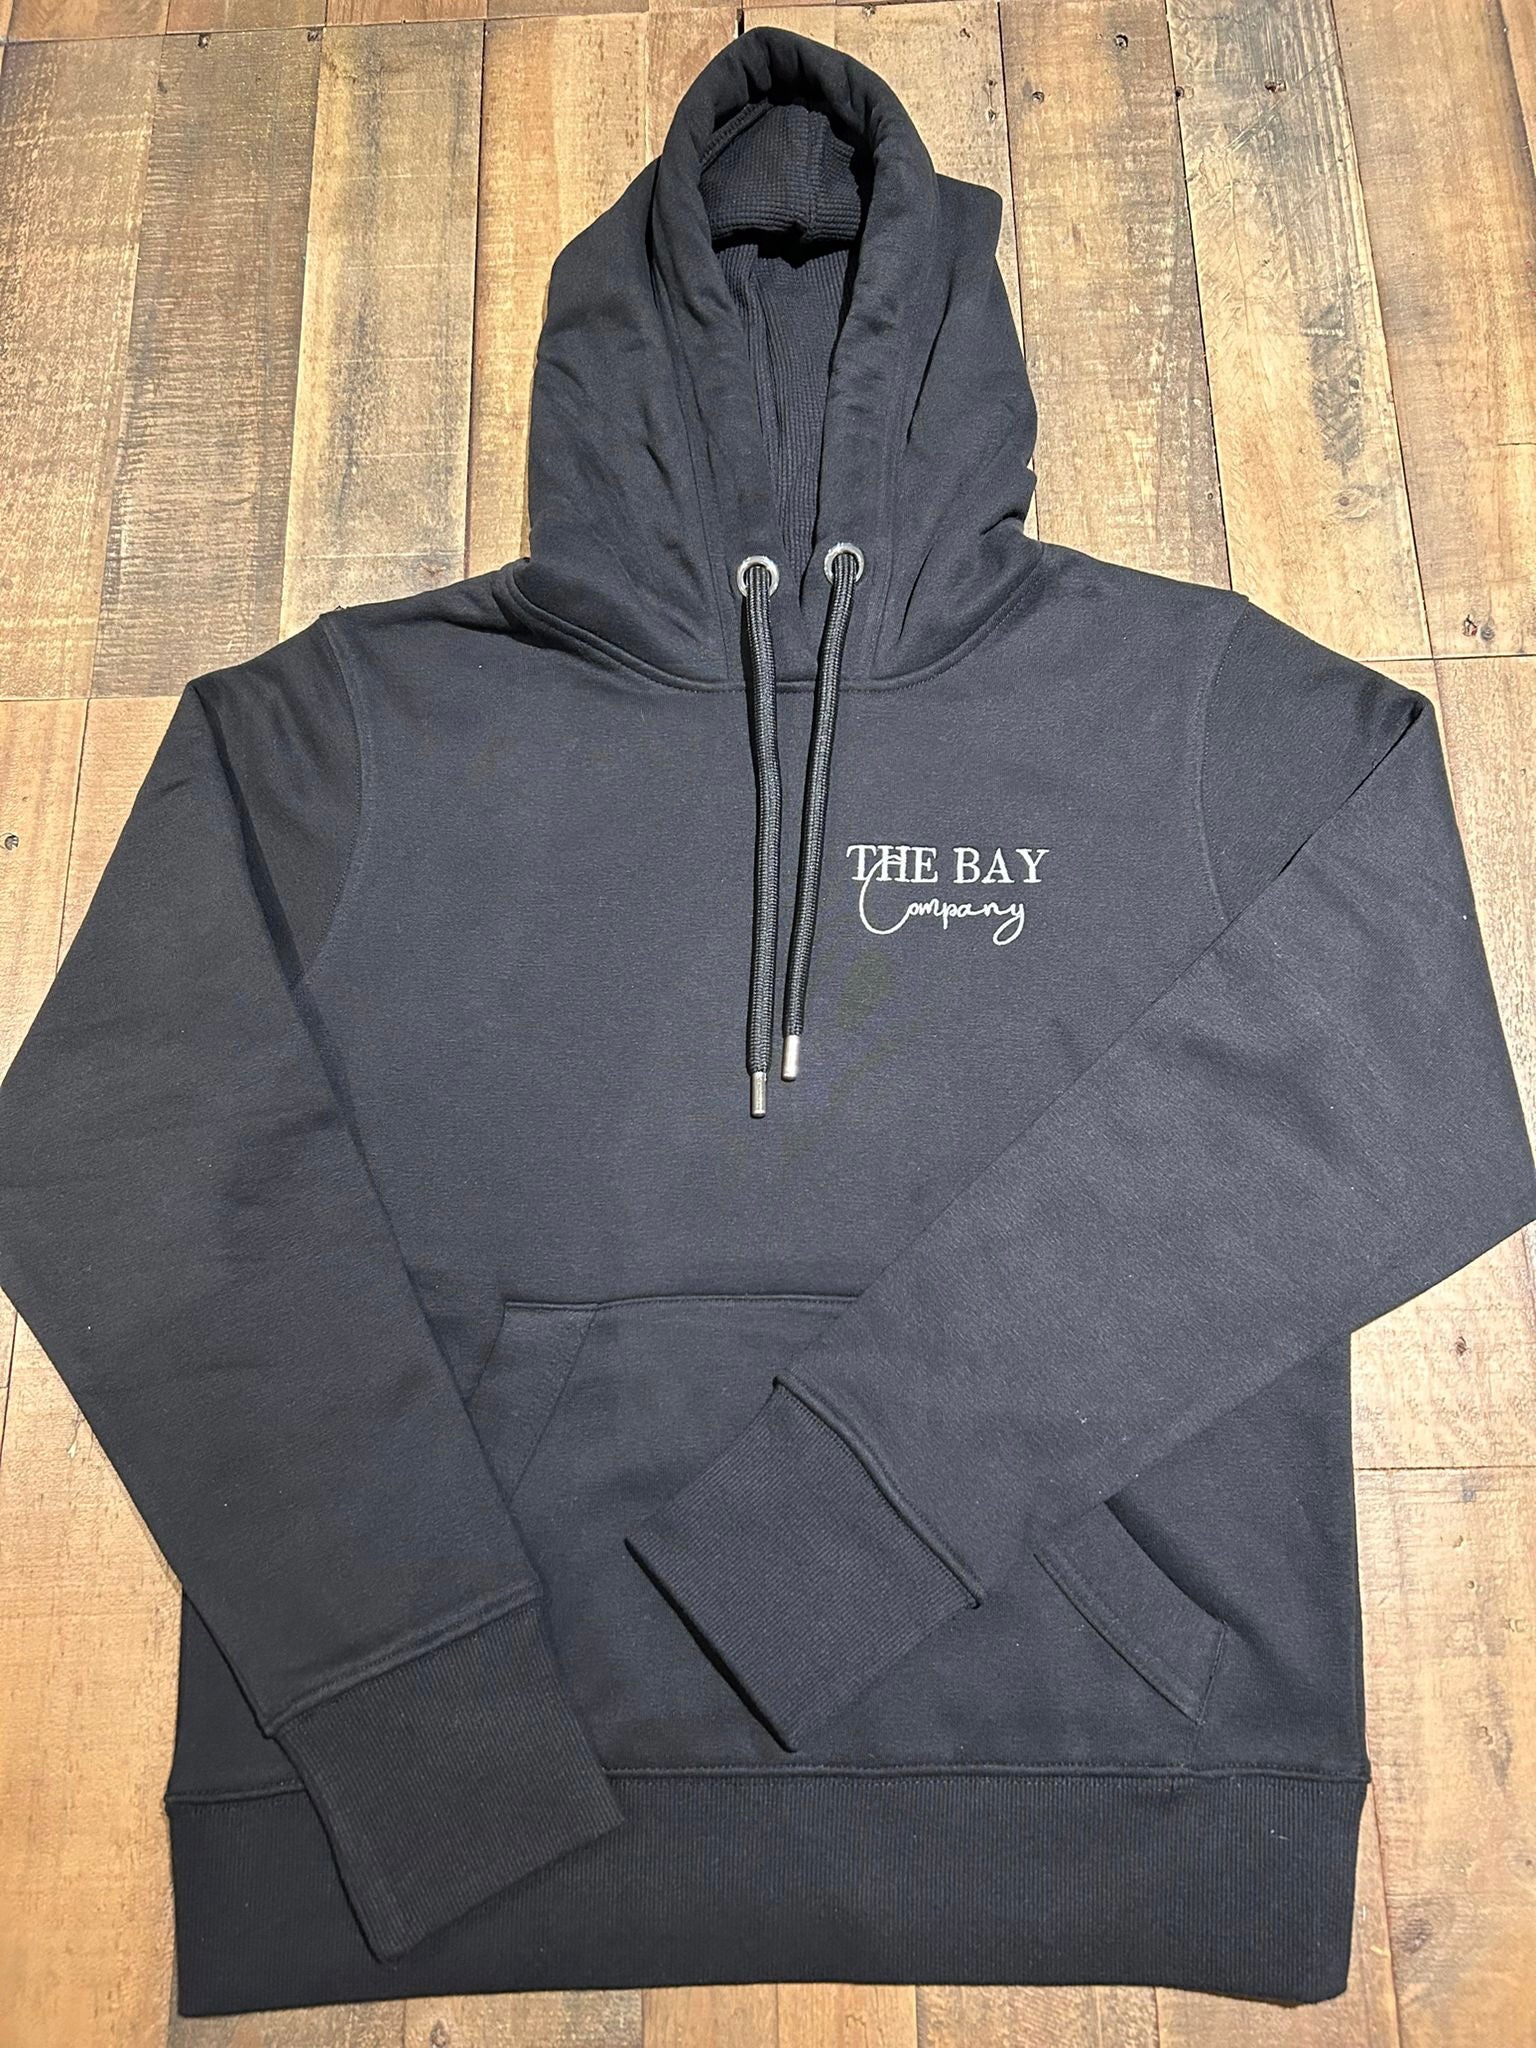 The black “The Bay Company” men’s hoodie. 